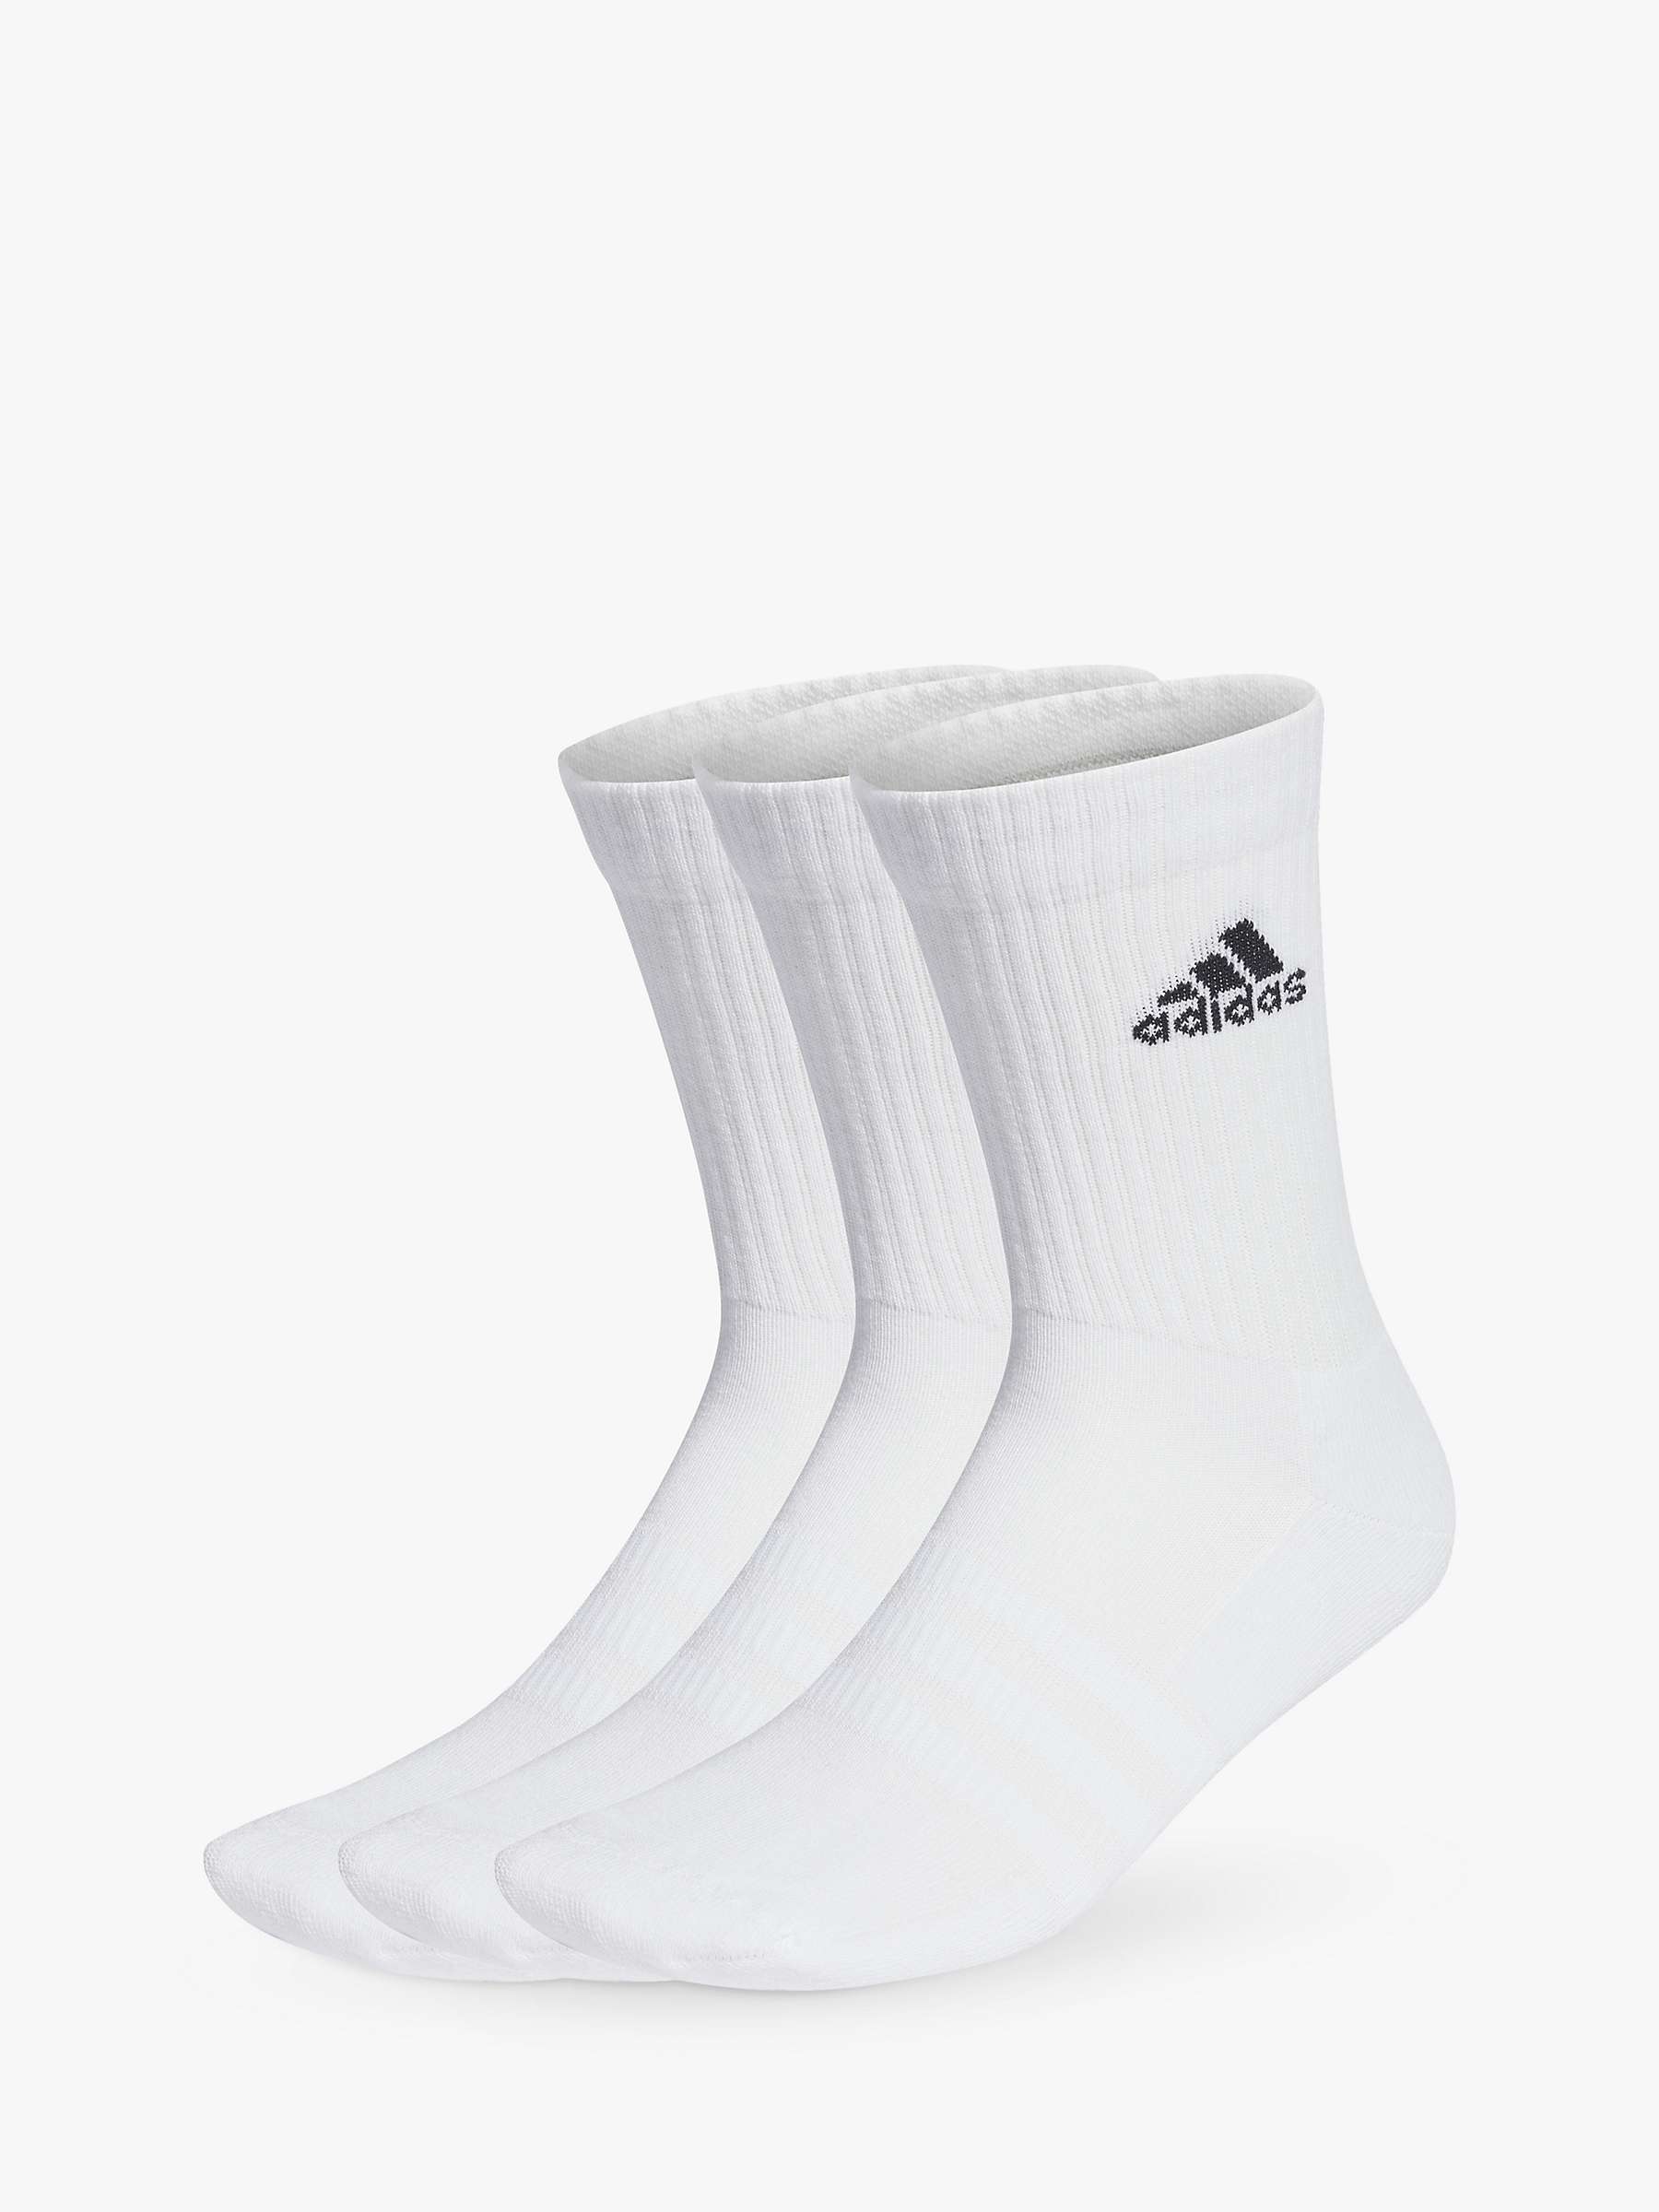 Buy adidas Cushioned Crew Socks, Pack of 3 Online at johnlewis.com